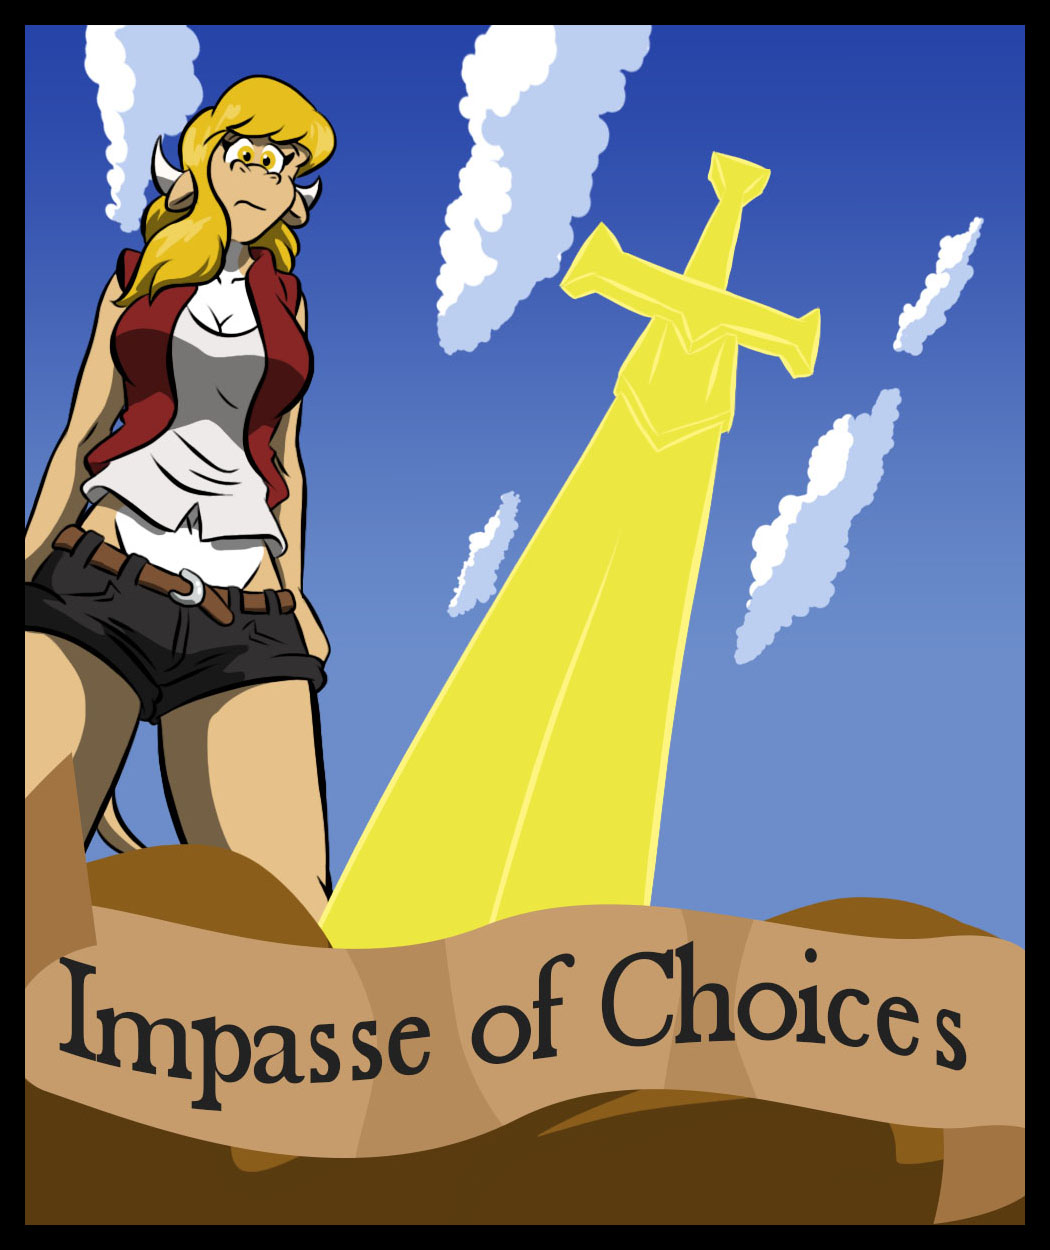 Impass of choices